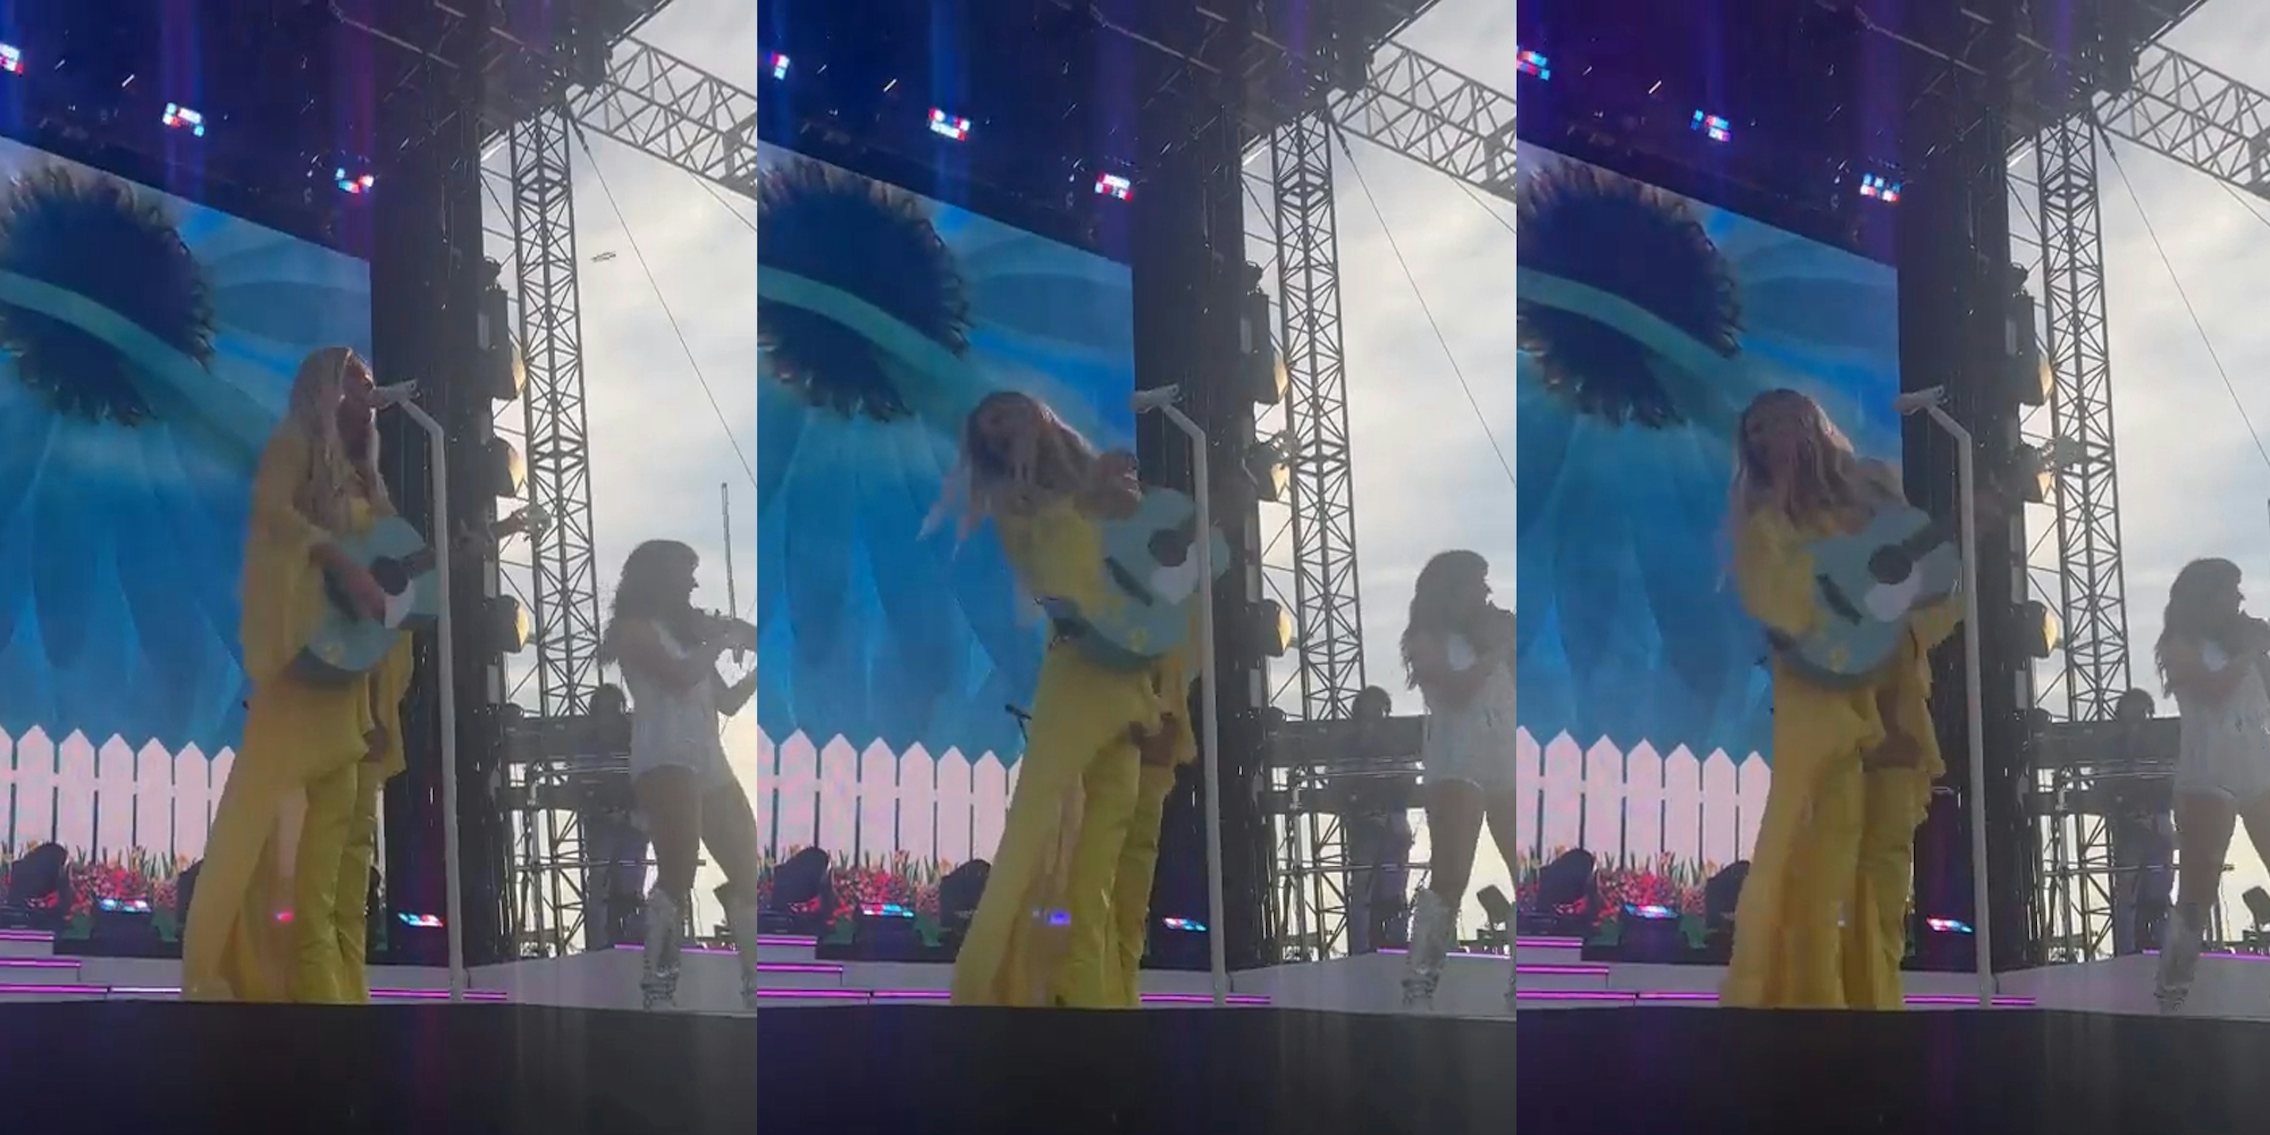 Kelsea Ballerini singing on stage with item in air being thrown (l) Kelsea Ballerini hit with thrown item on stage (c) Kelsea Ballerini hit with thrown item on stage (r)